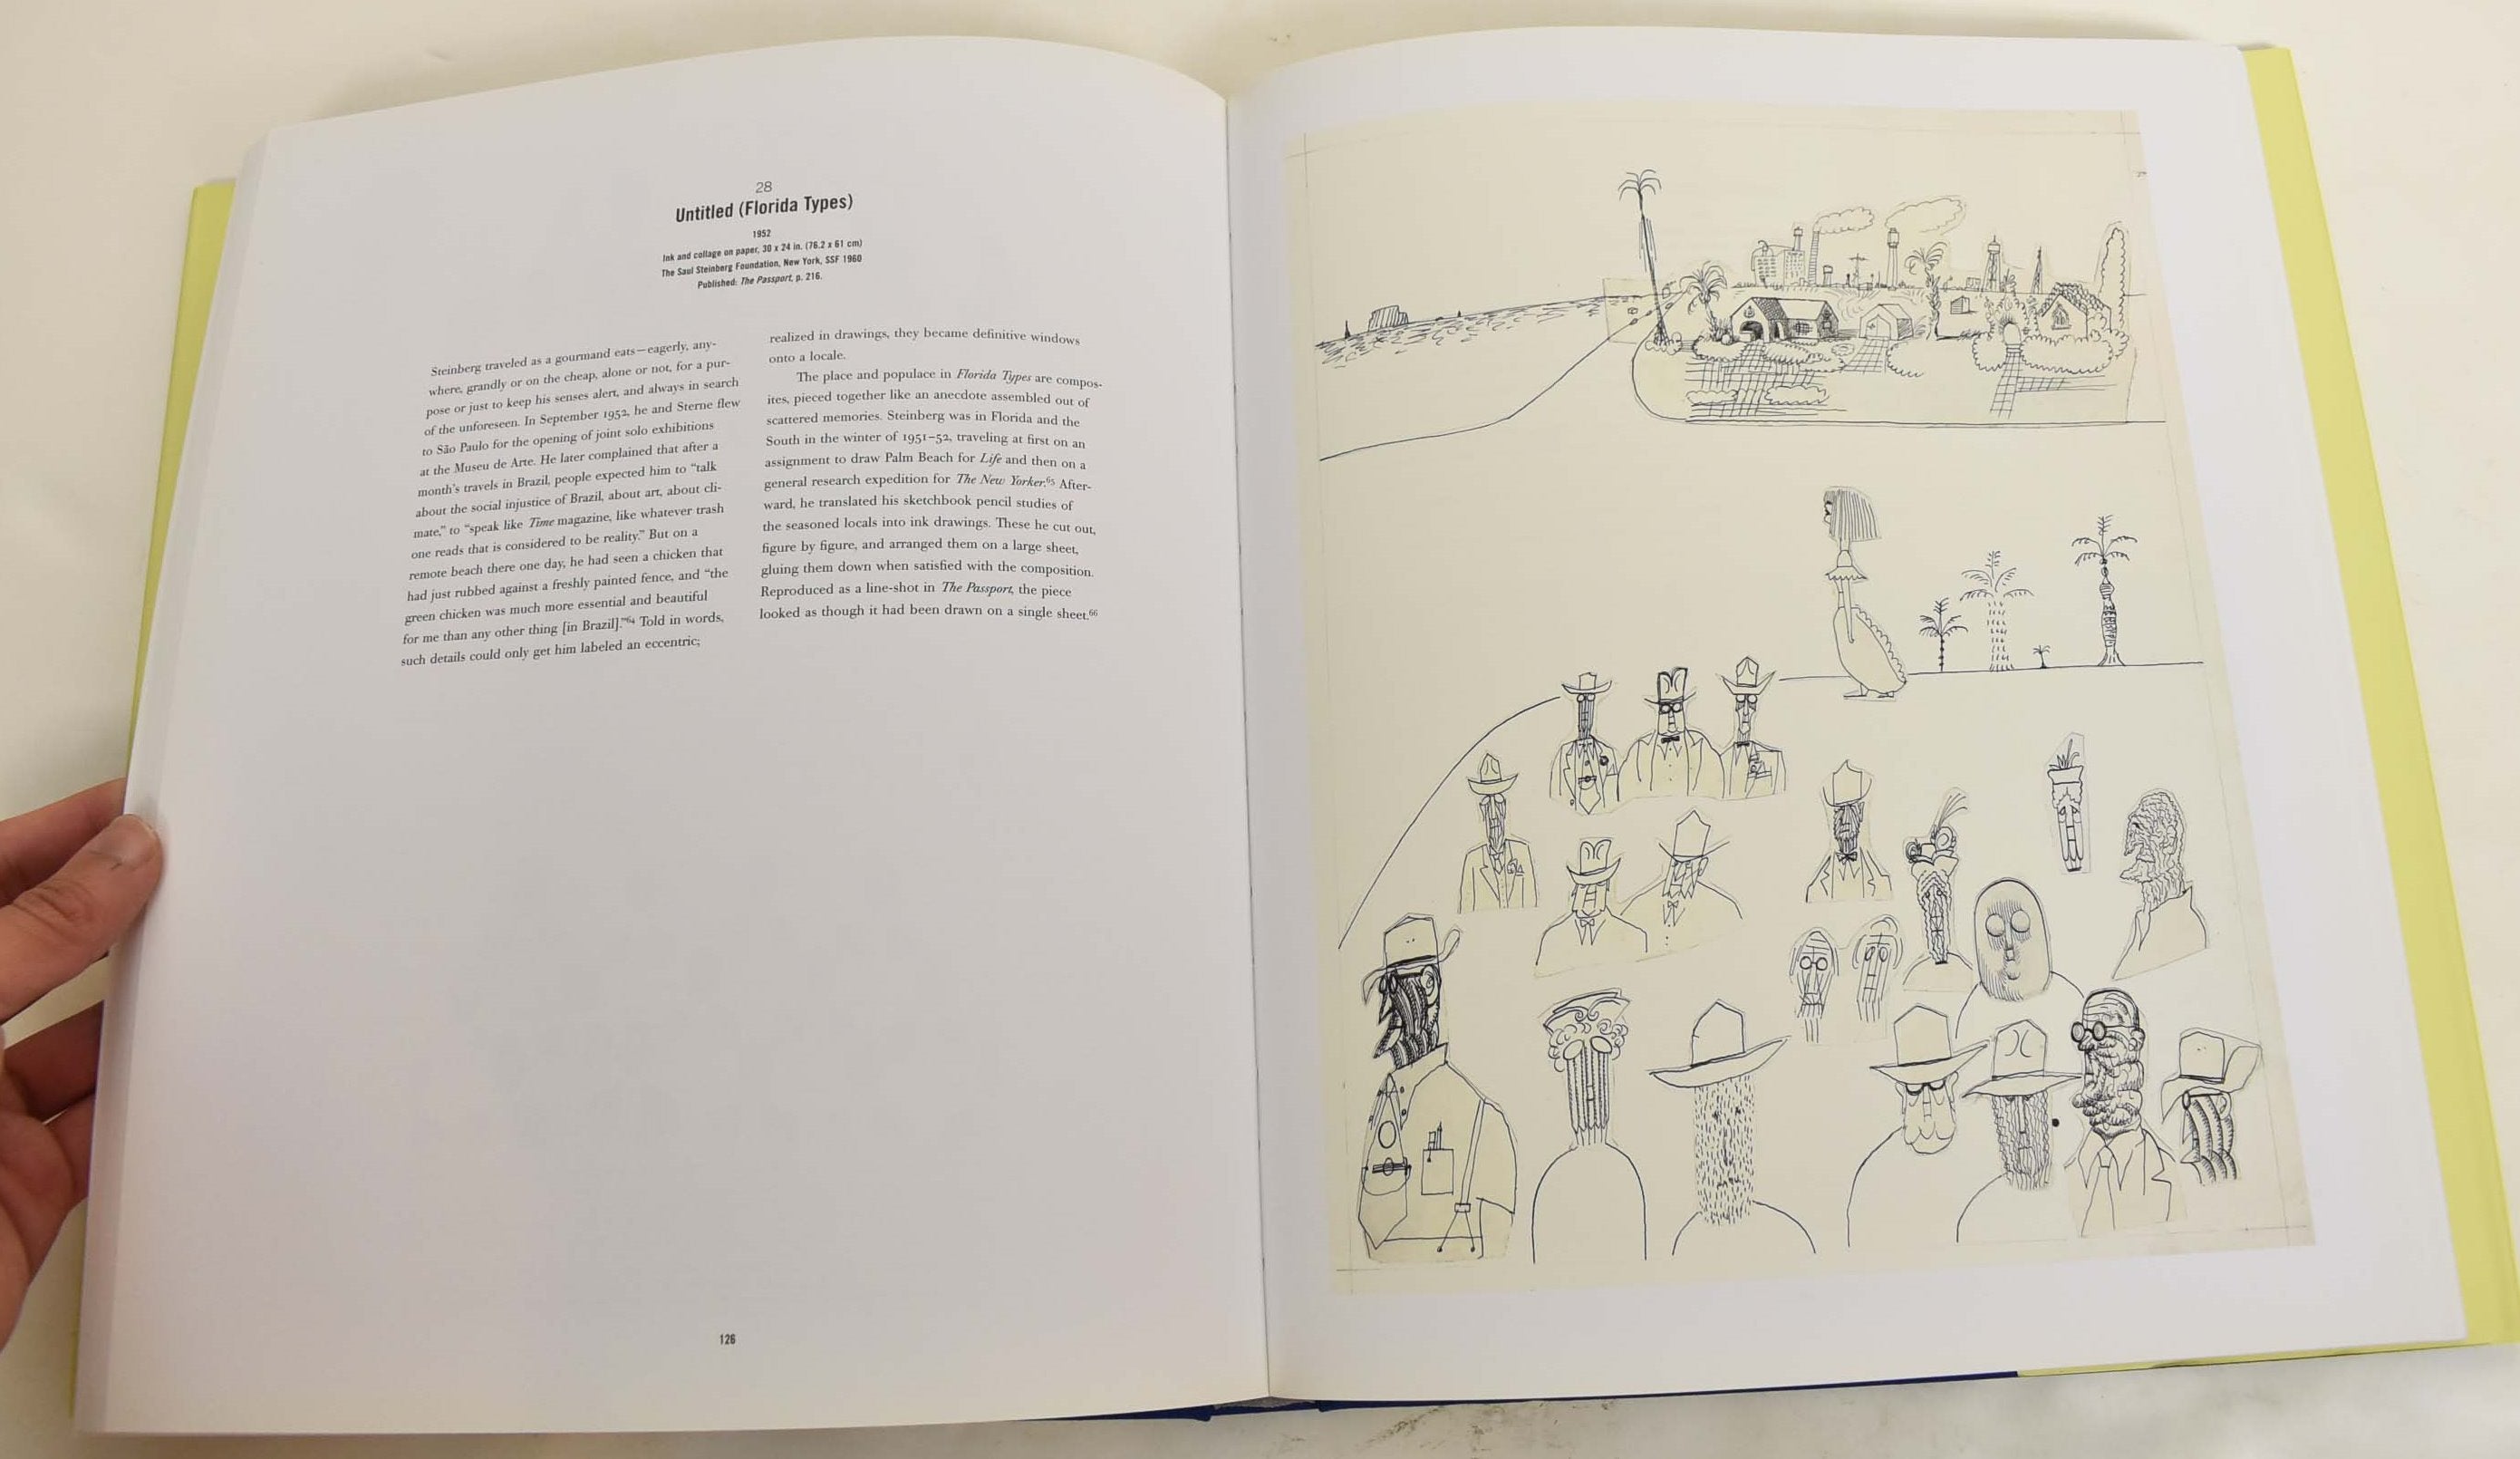 Saul Steinberg: Illuminations by Joel Smith, Charles Simic on Mullen Books